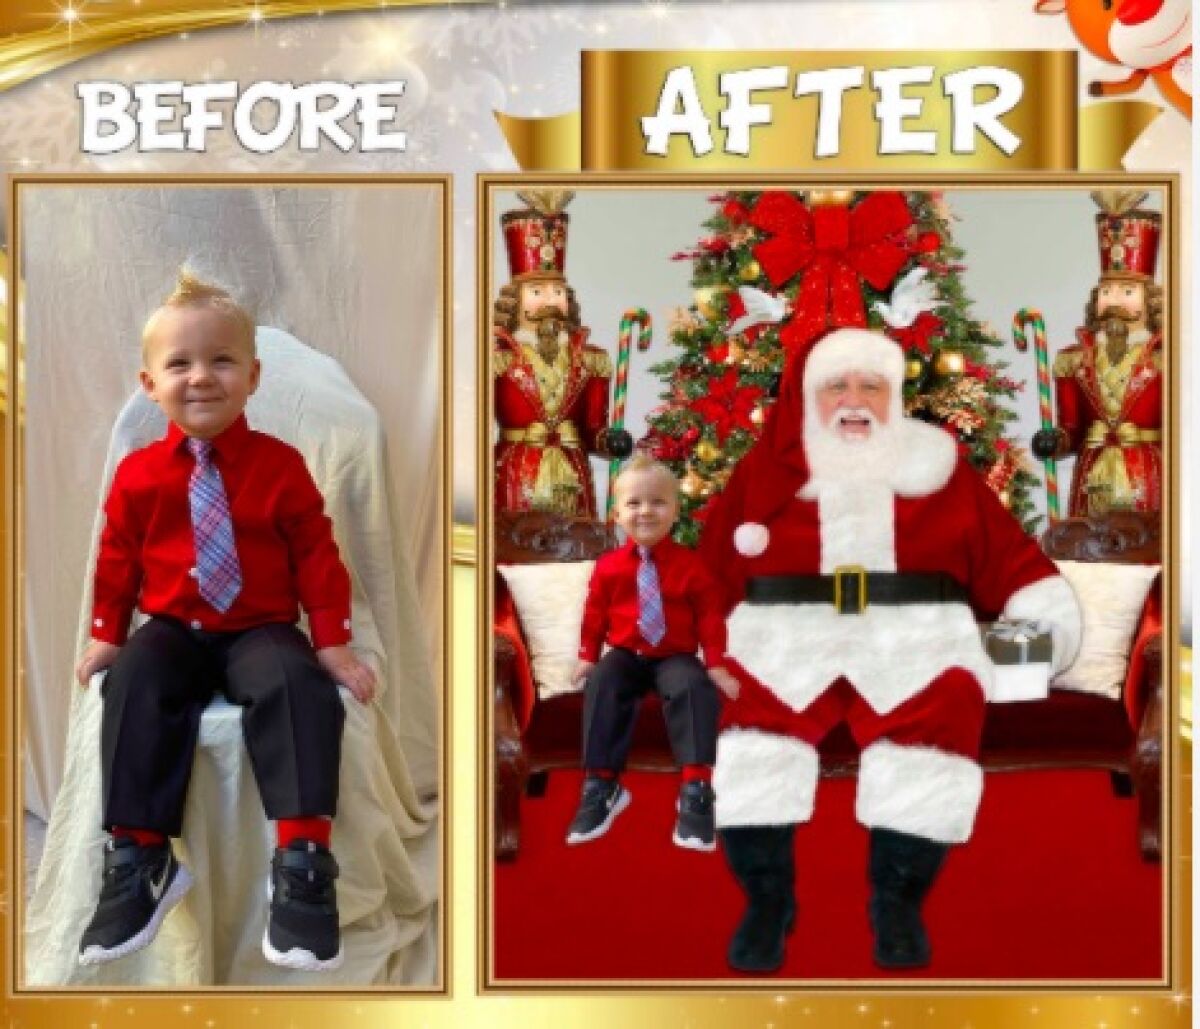 Plaza Paseo Real has partnered with Picture Me Santa for COVID-safe photos.